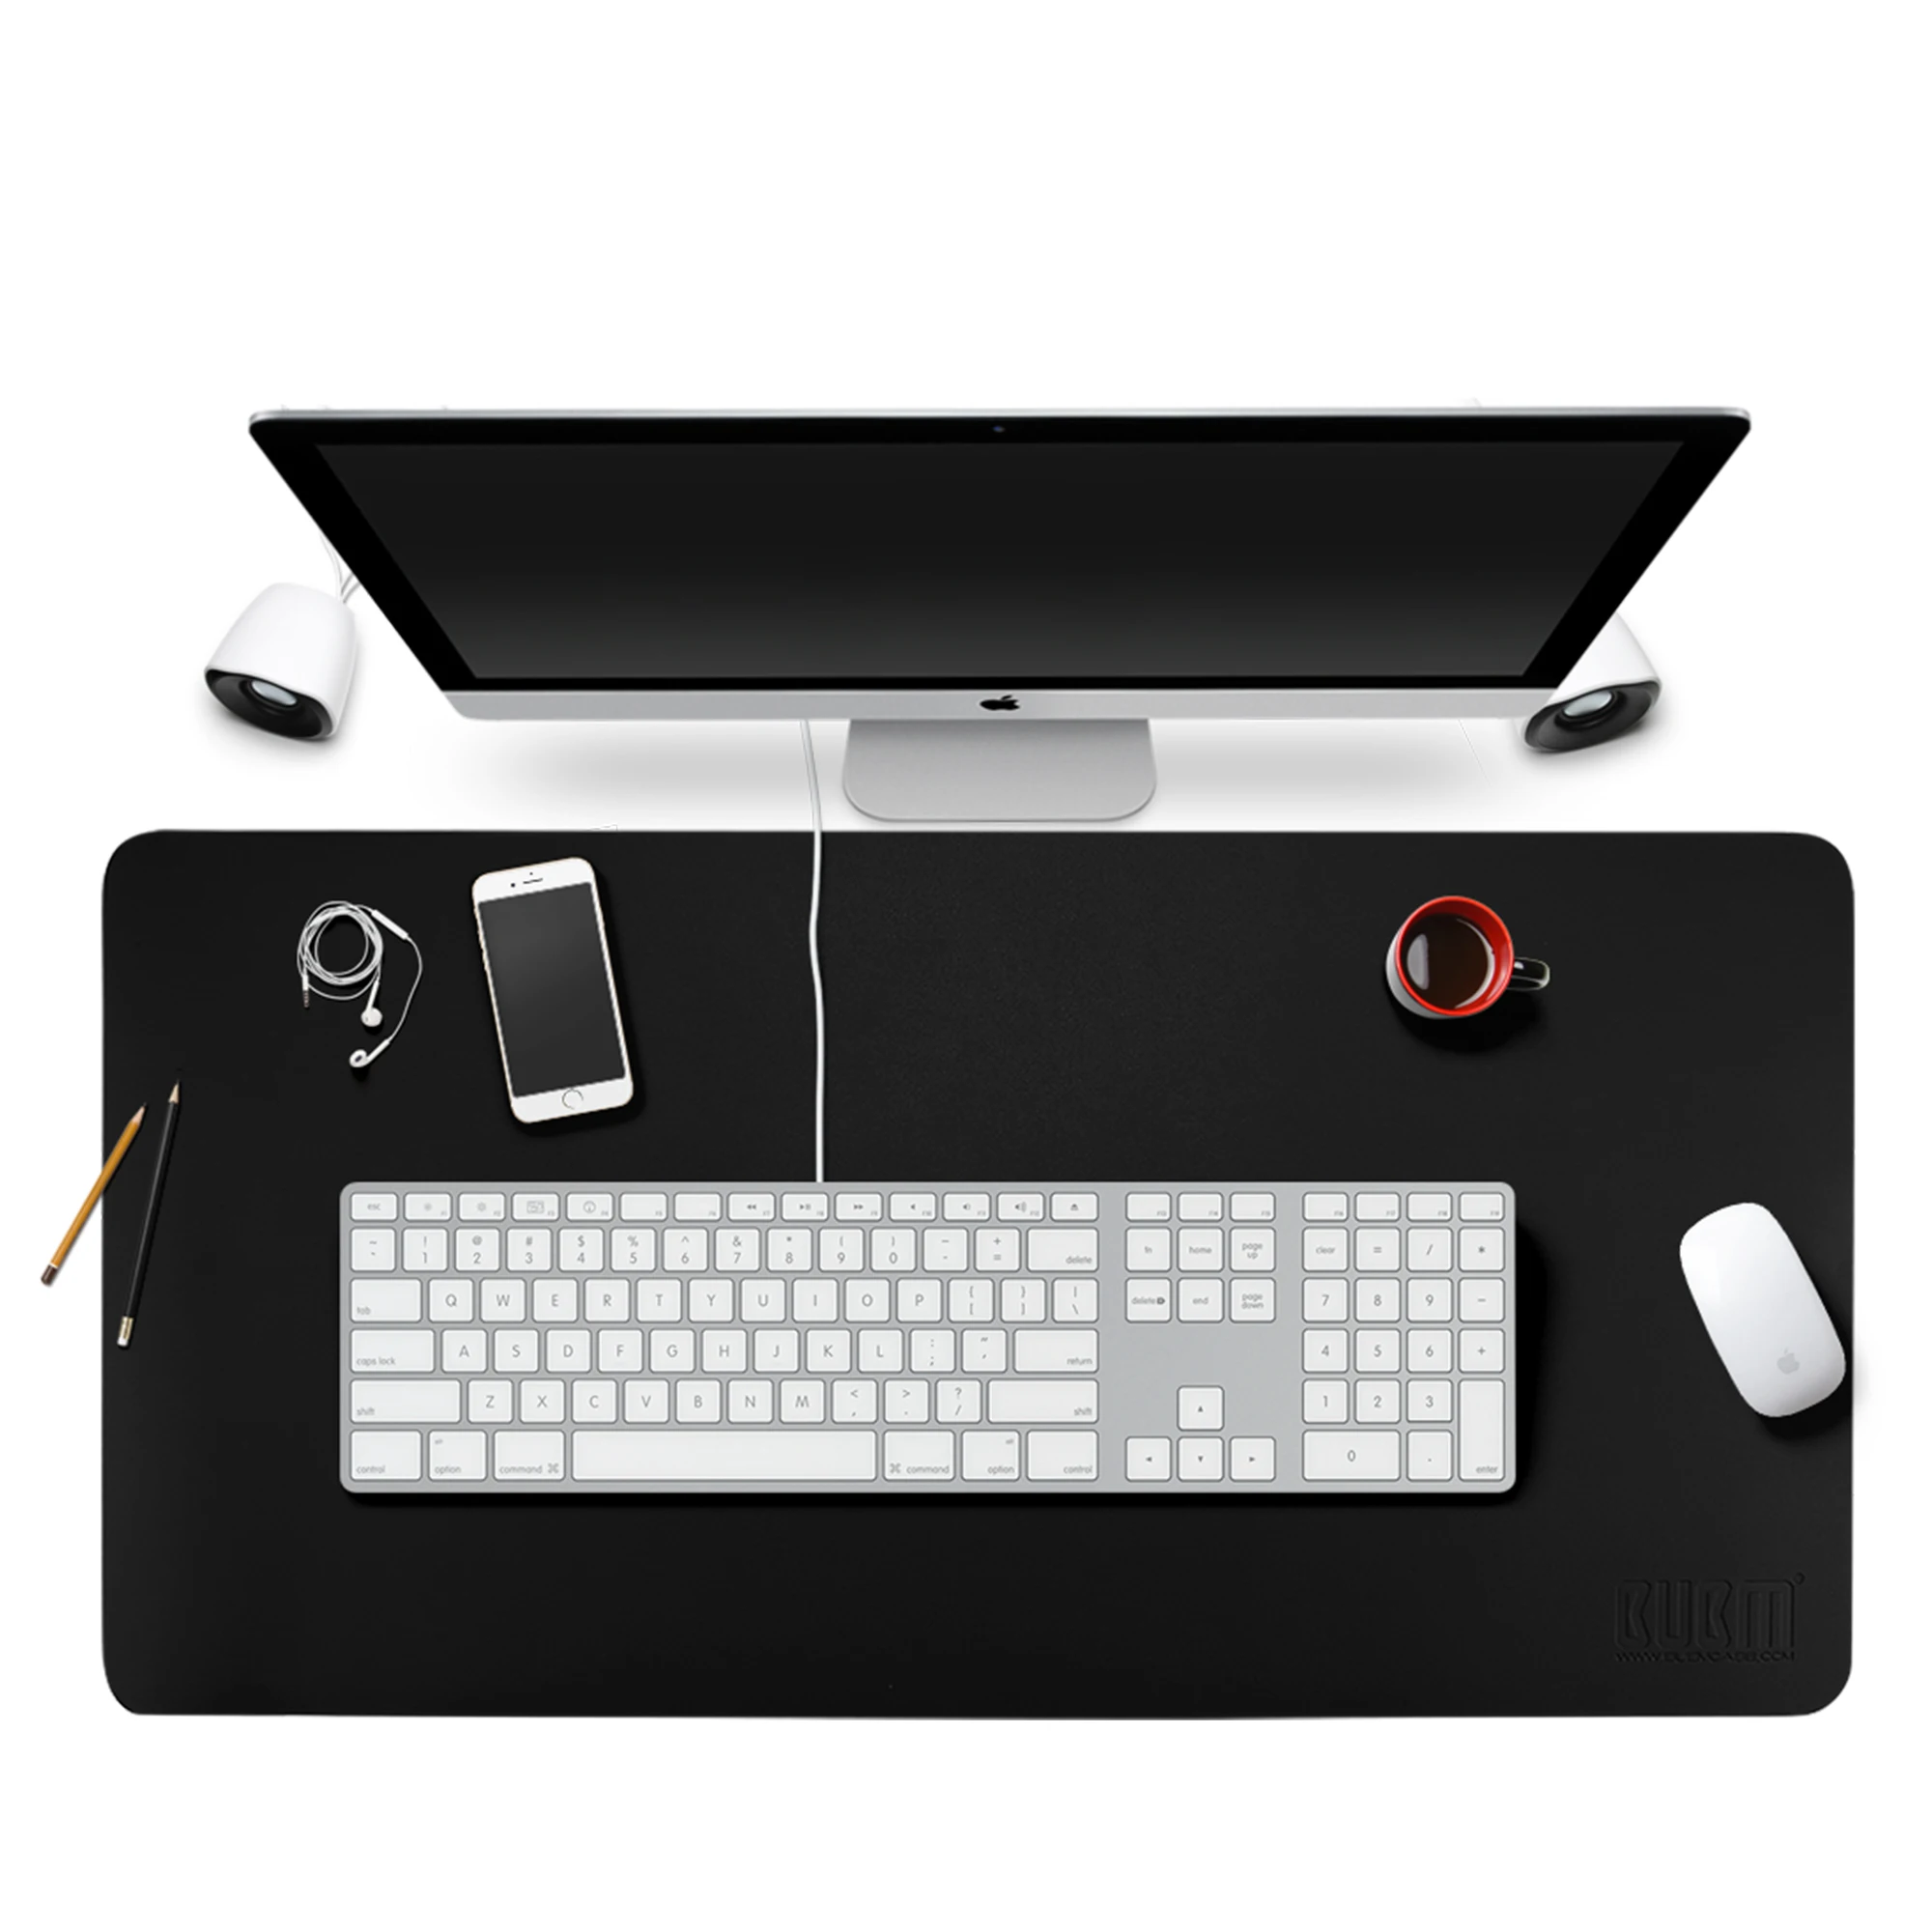 Dual-Sided Multifunctional Desk Pad Waterproof Desk Blotter Protector PU Leather Desk Mat Mouse Pad